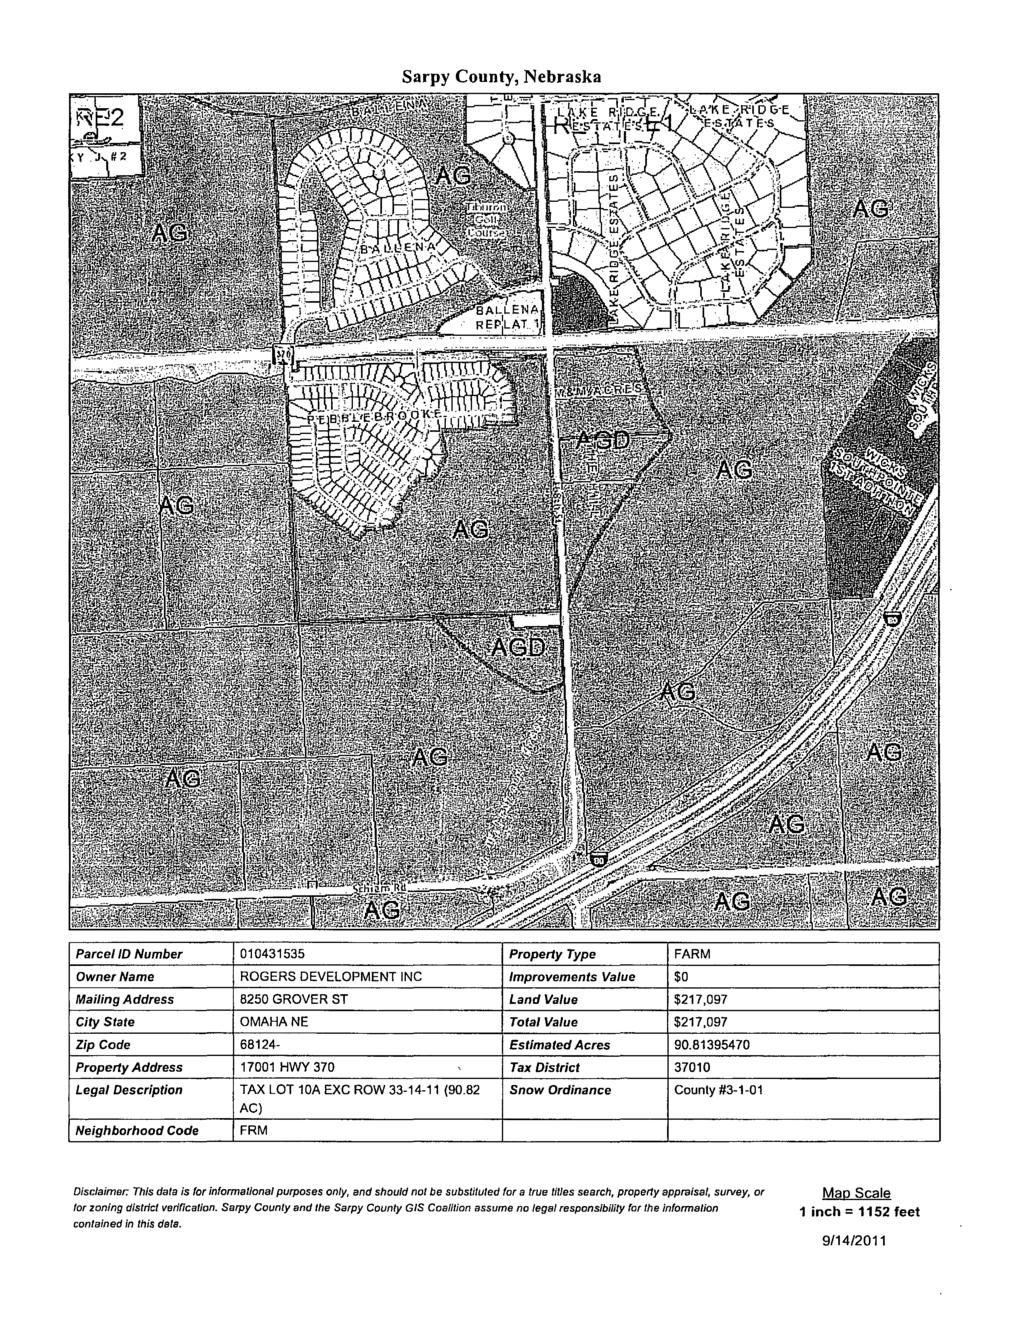 Sarpy County, Nebraska ParceiiD Number 010431535 Property Type FARM Owner Name ROGERS DEVELOPMENT NC mprovements Value $0 Mailing Address 8250 GROVER ST Land Value $217,097 City State OMAHANE Total